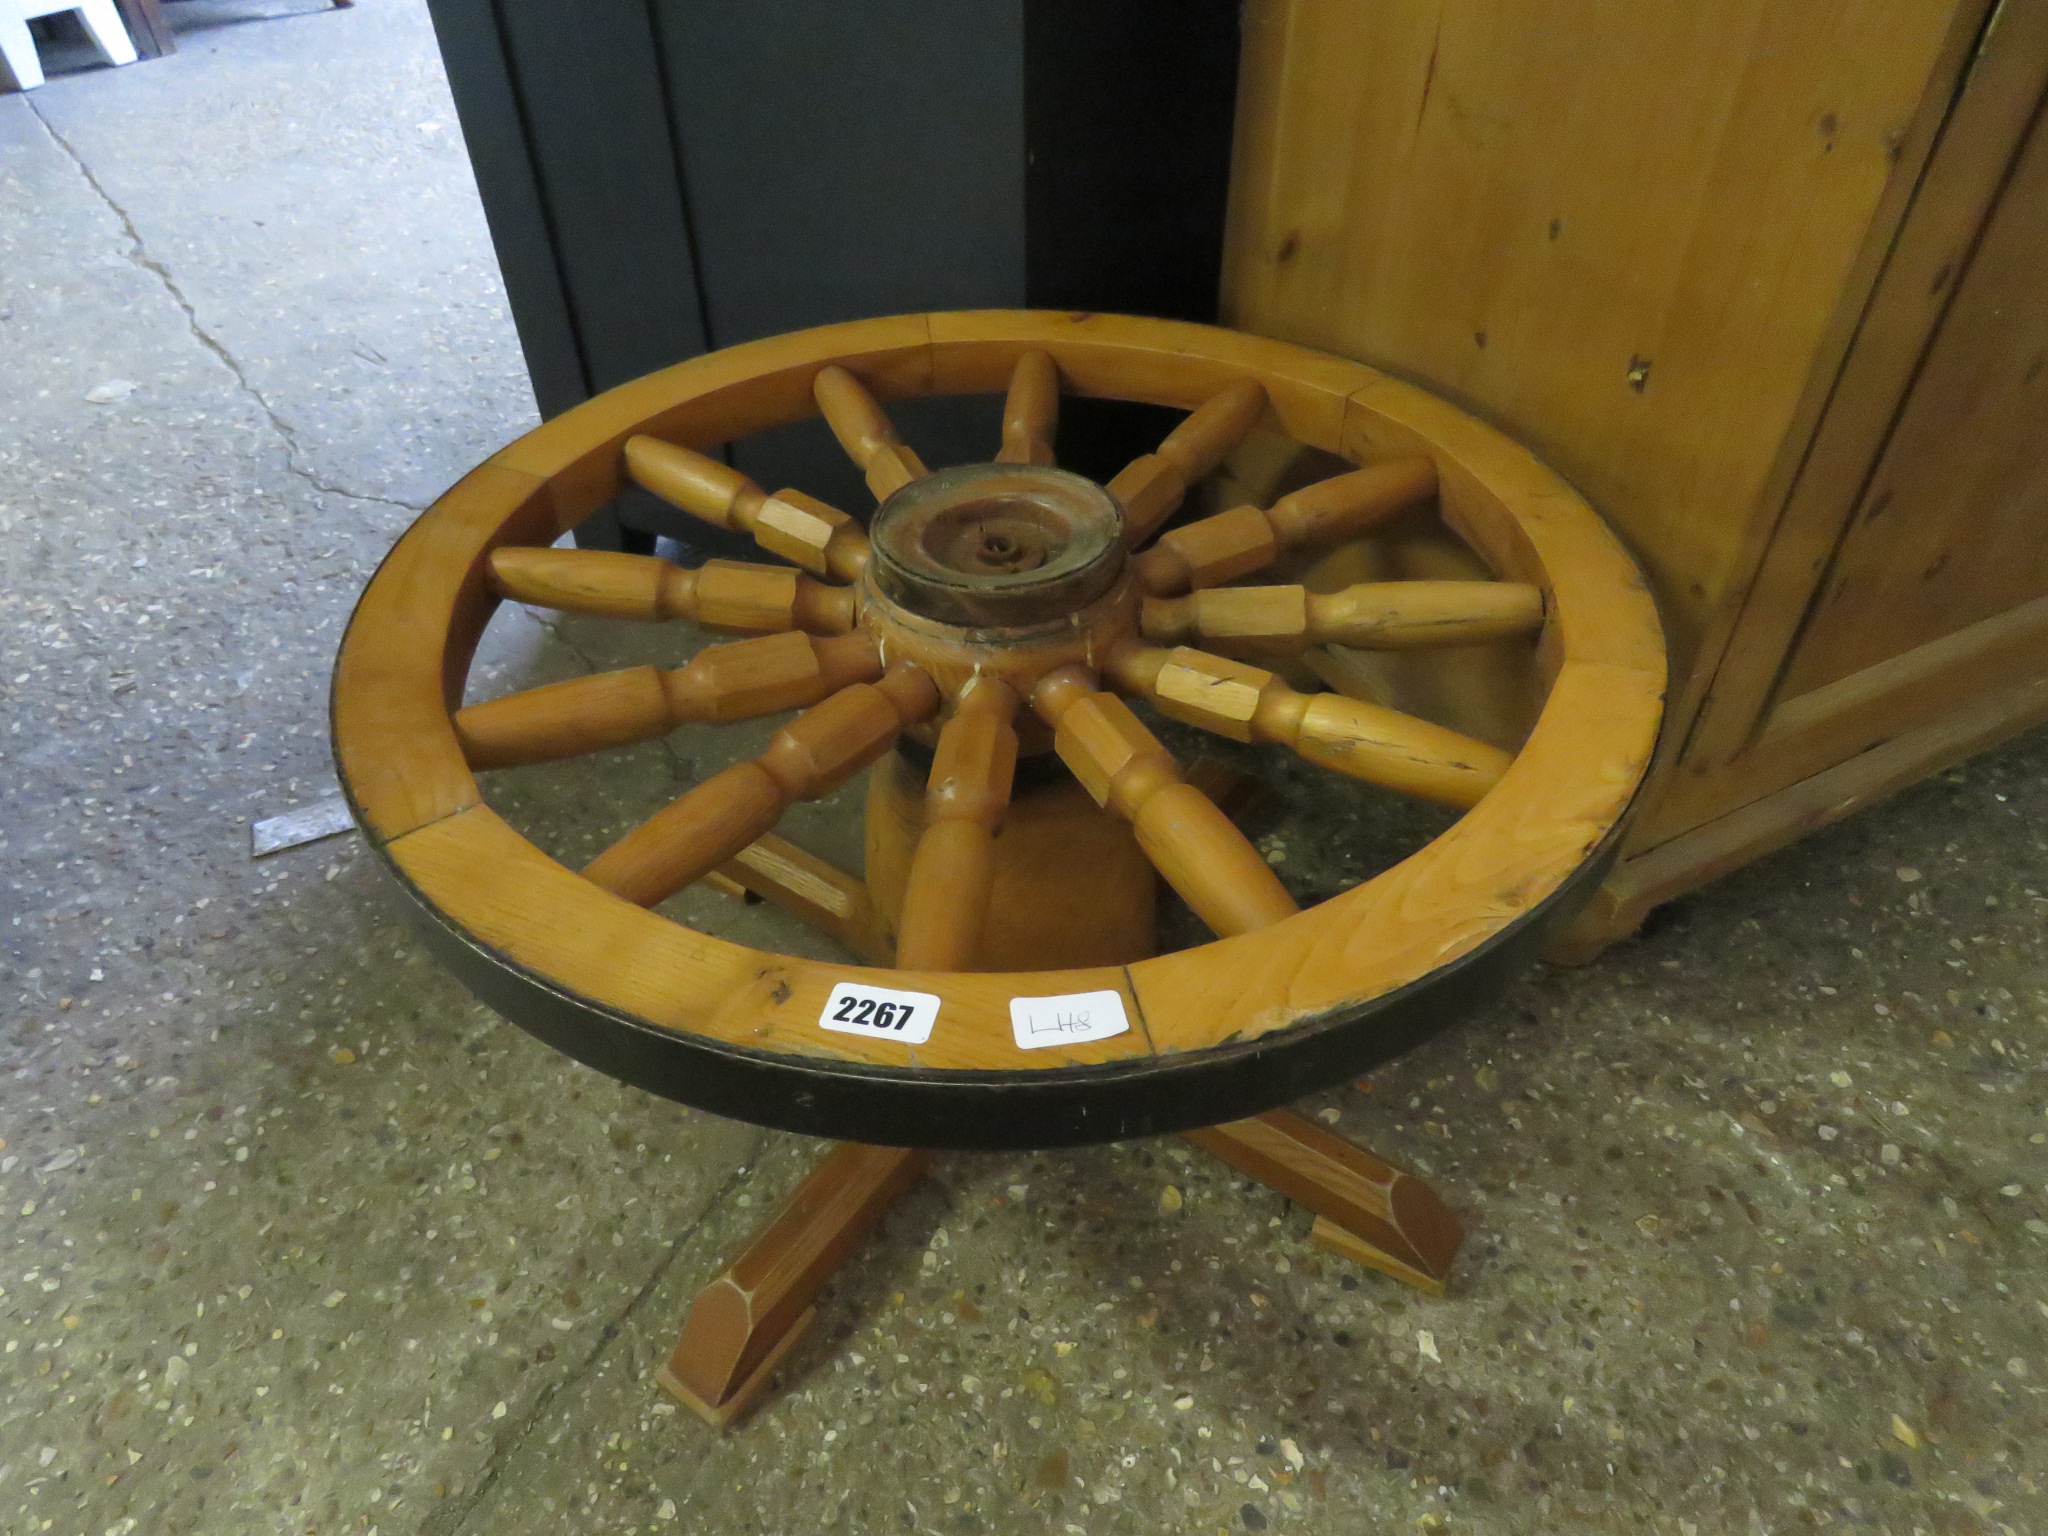 Small table in the form of a ship's wheel